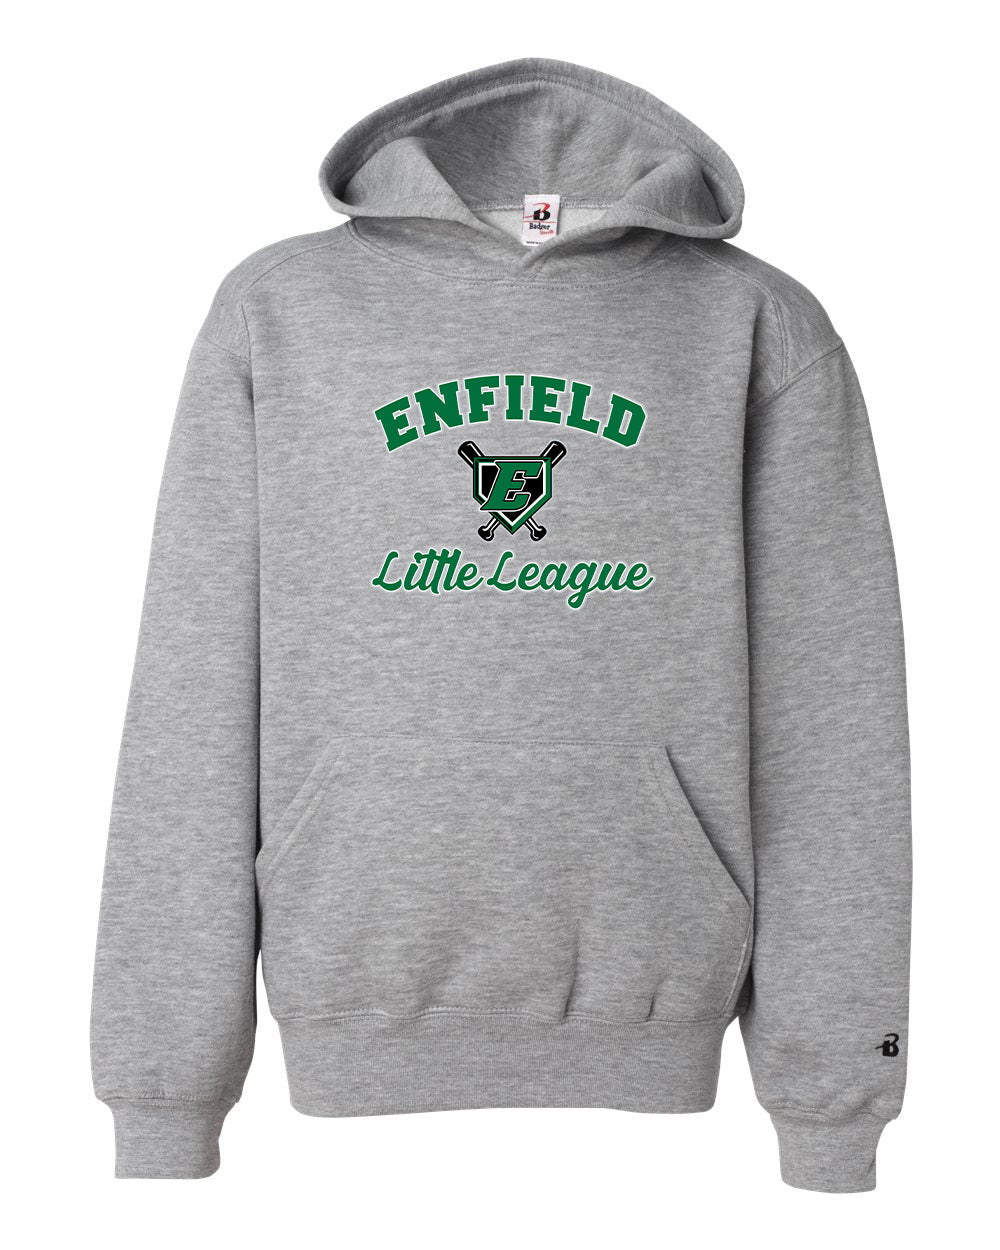 ELL Youth Badger Hooded Sweatshirt "Cursive" - 2254 (color options available)